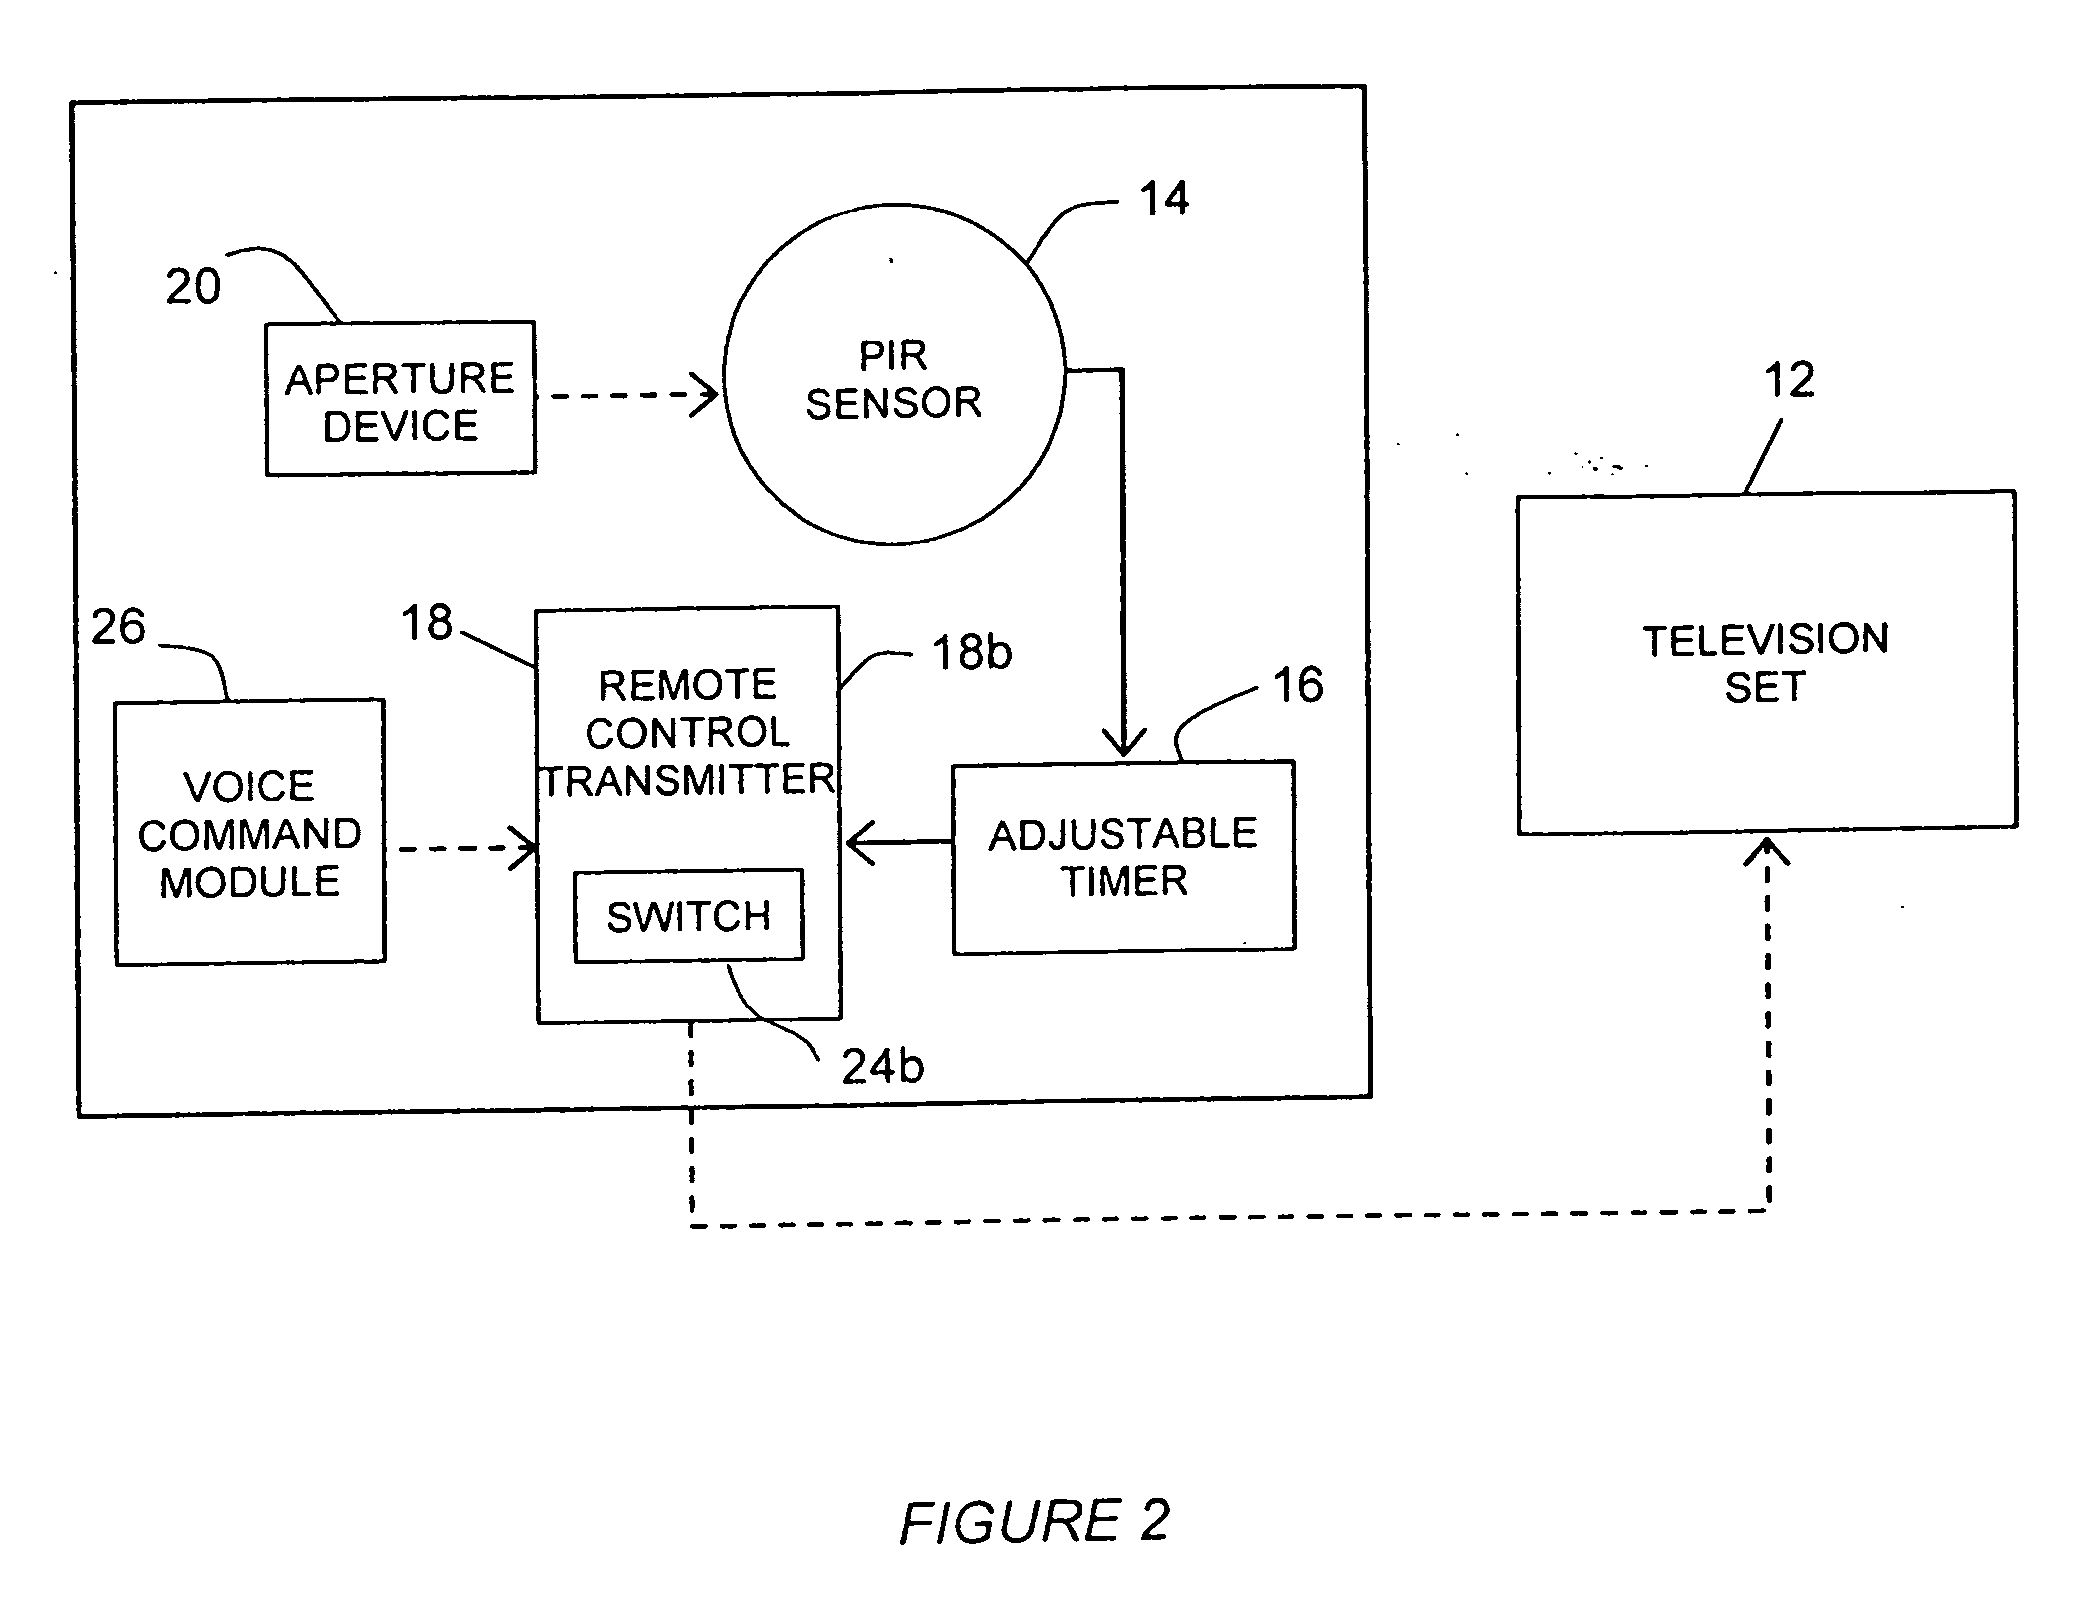 Infrared sensor unit for controlling operation of electrically powered appliances